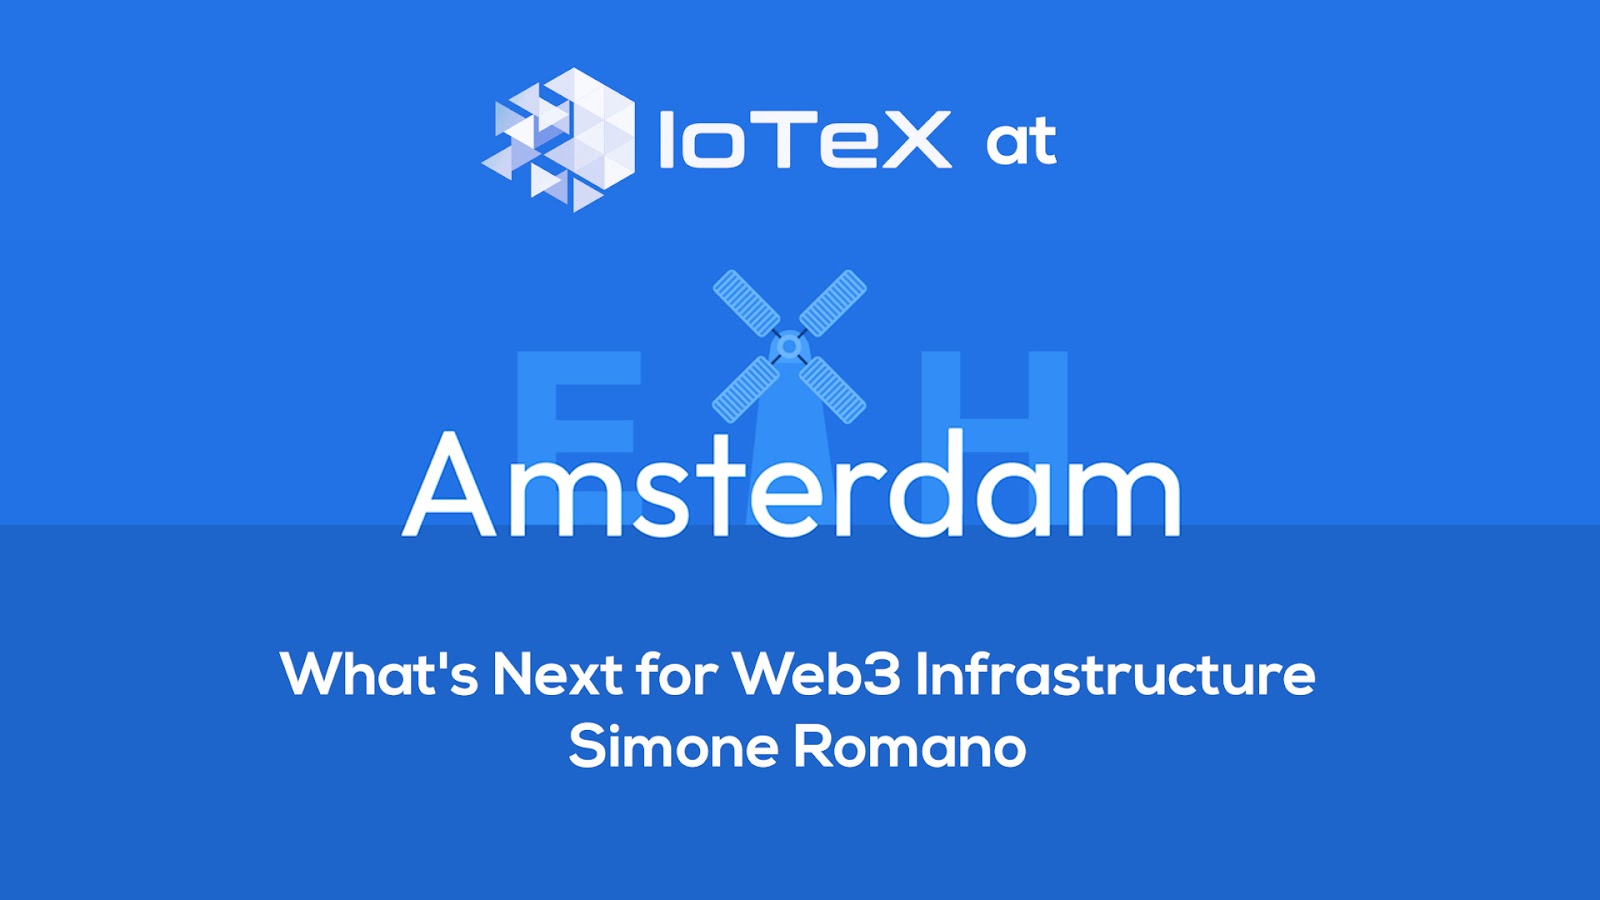 Banner: What's Next for Web3 Infrastructure with Simone Romano